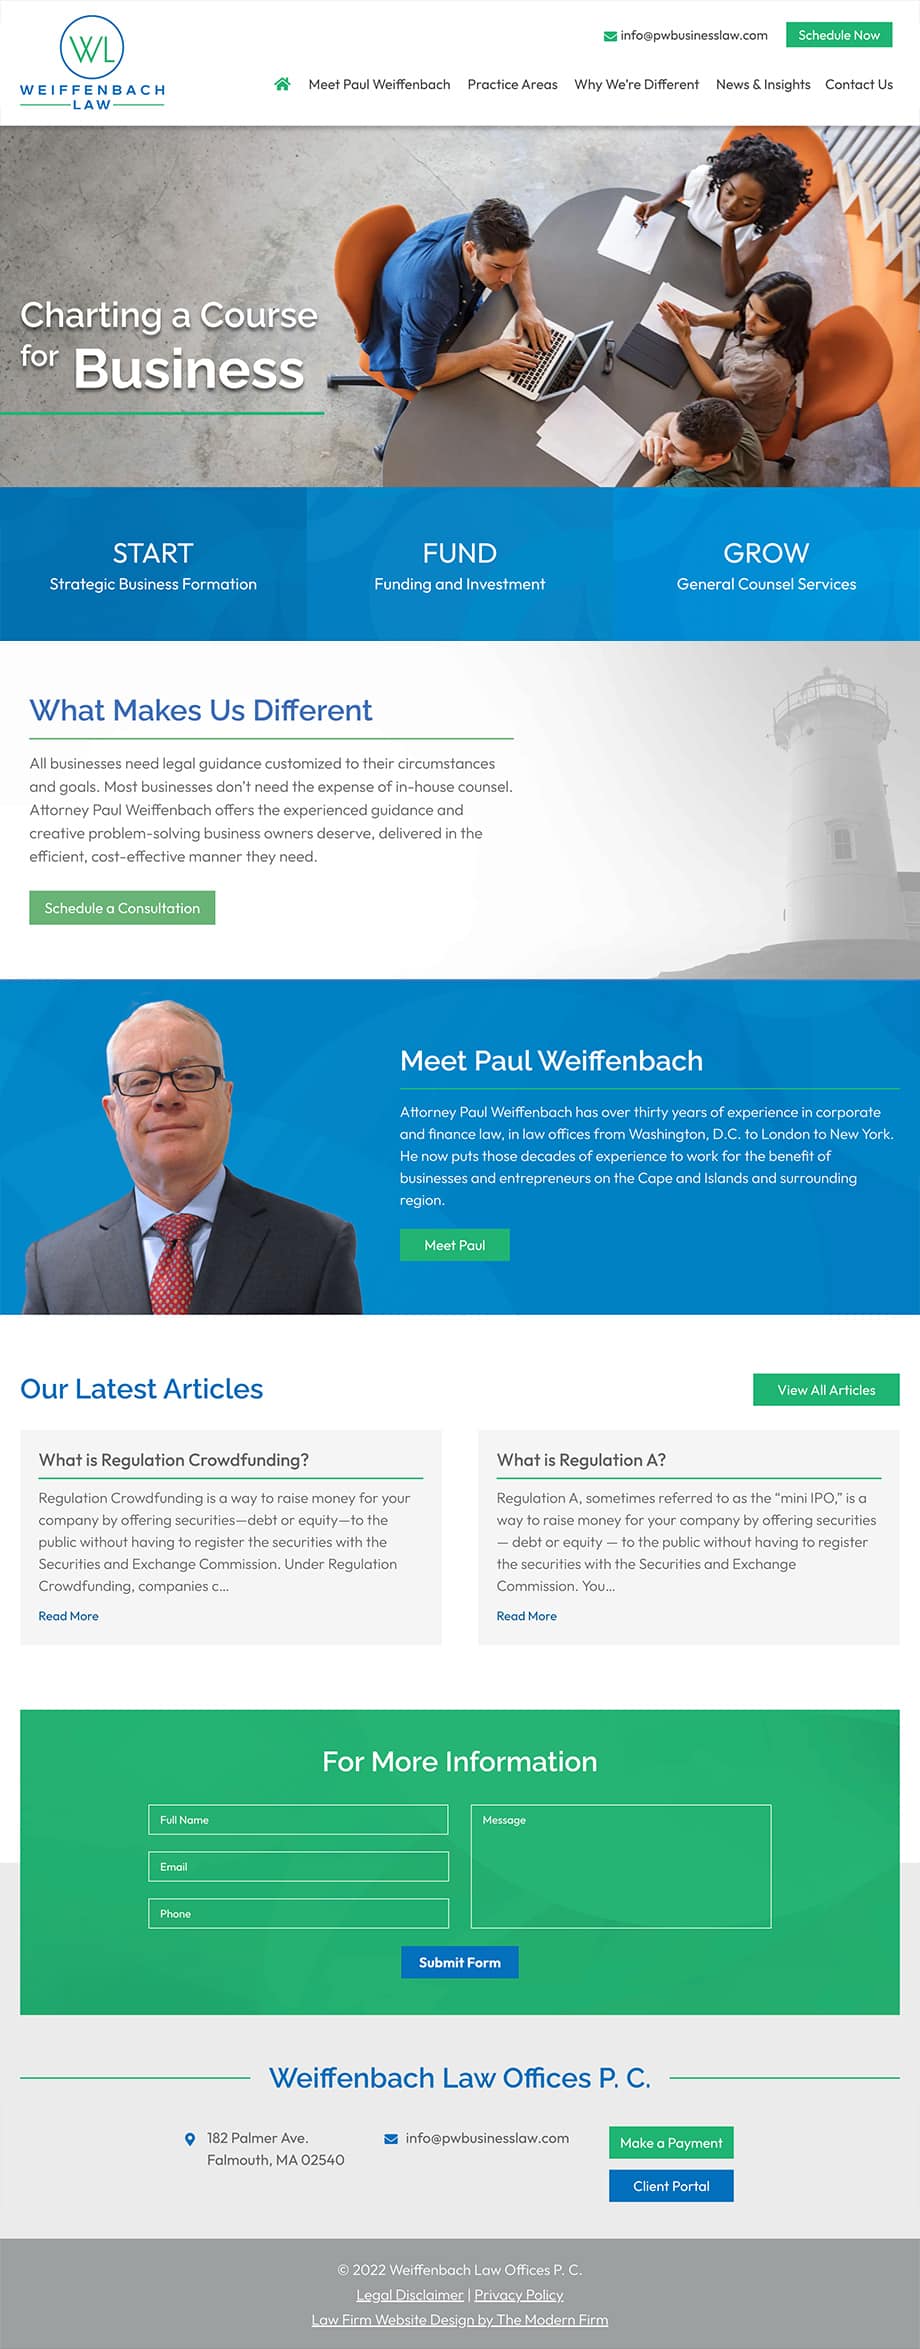 Law Firm Website Design for Weiffenbach Law Offices P. C.